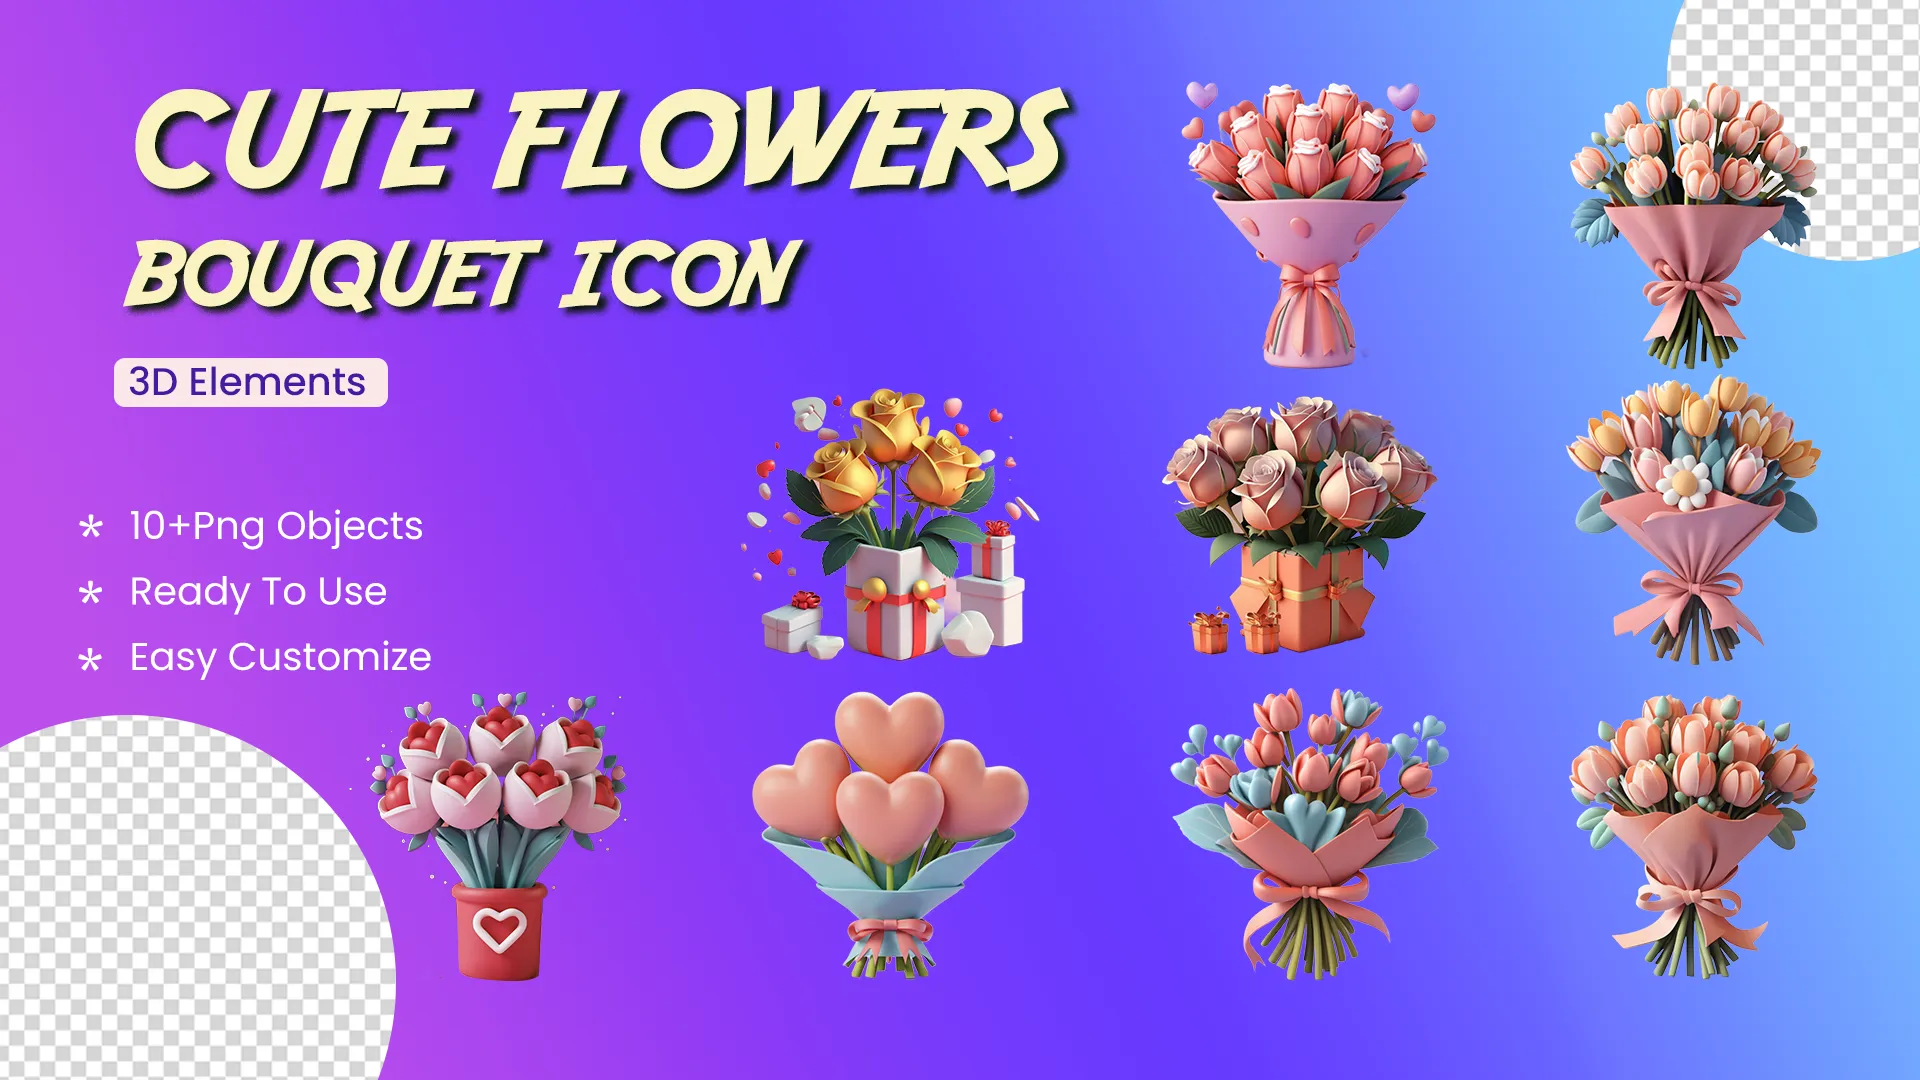 Charming 3D Flower Bouquet Icons Collection image